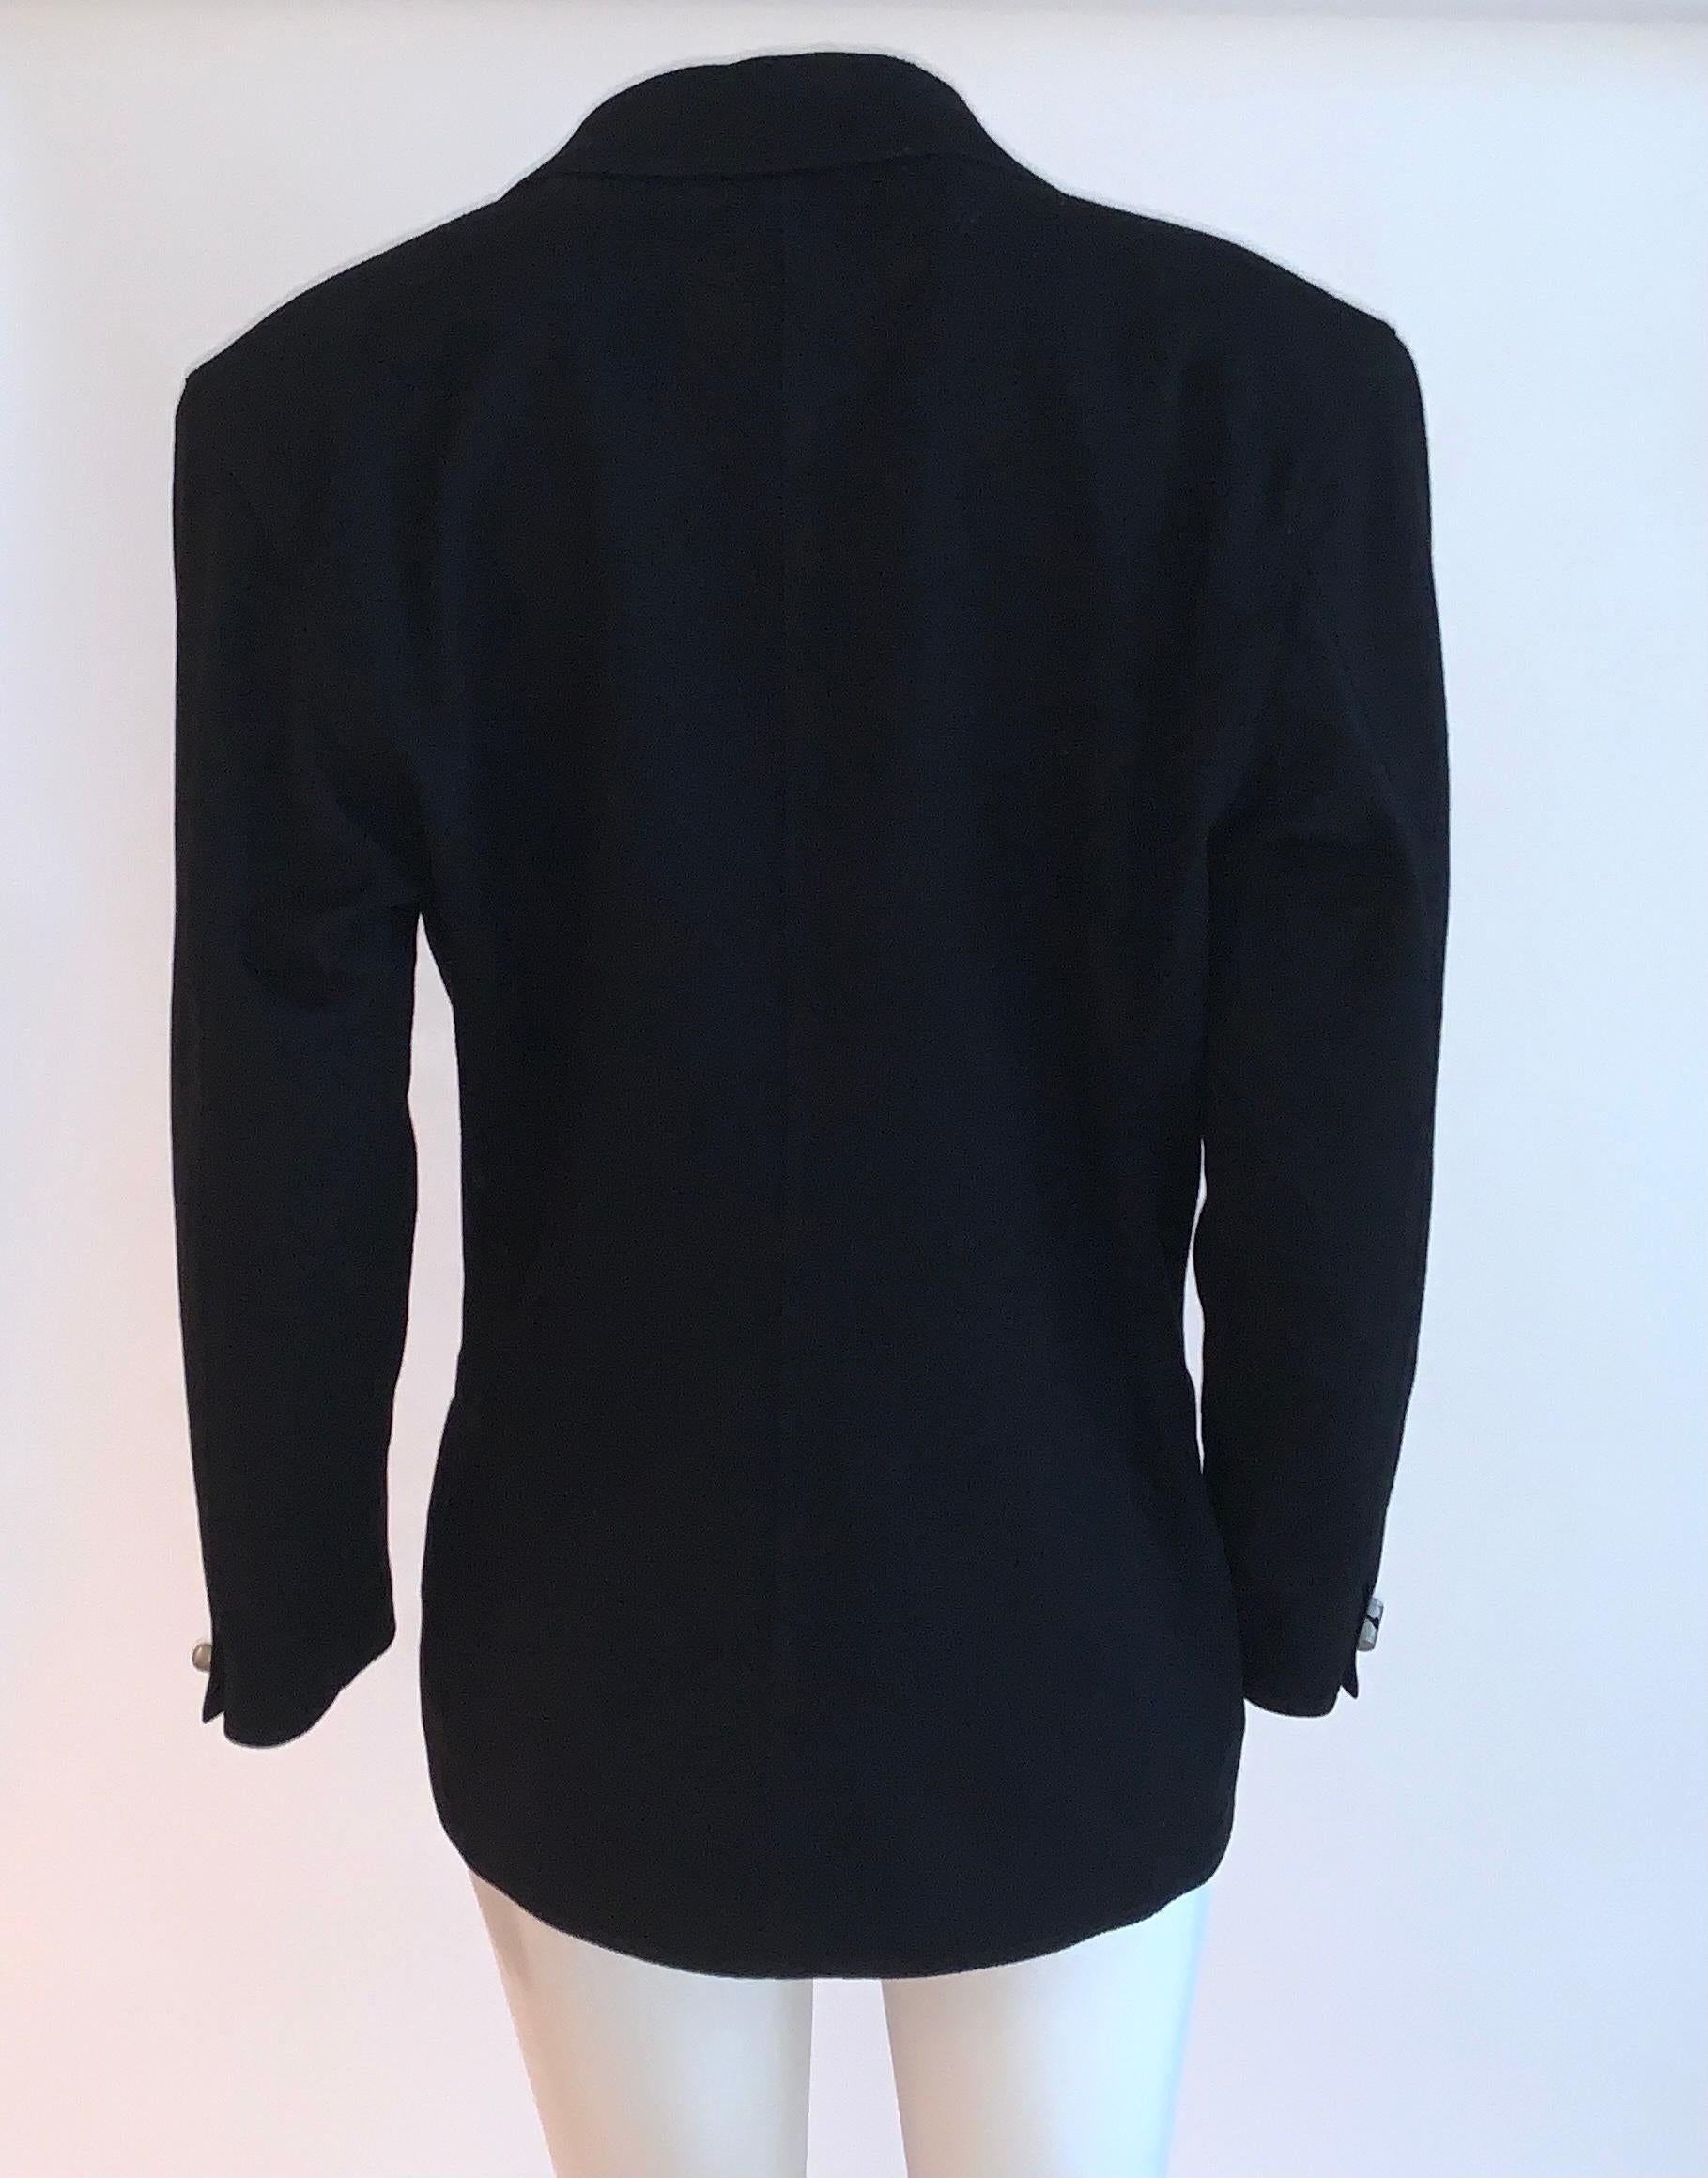 Women's Gianni Versace 1980s Black Wool Blazer with Silver Toggle Style Buttons